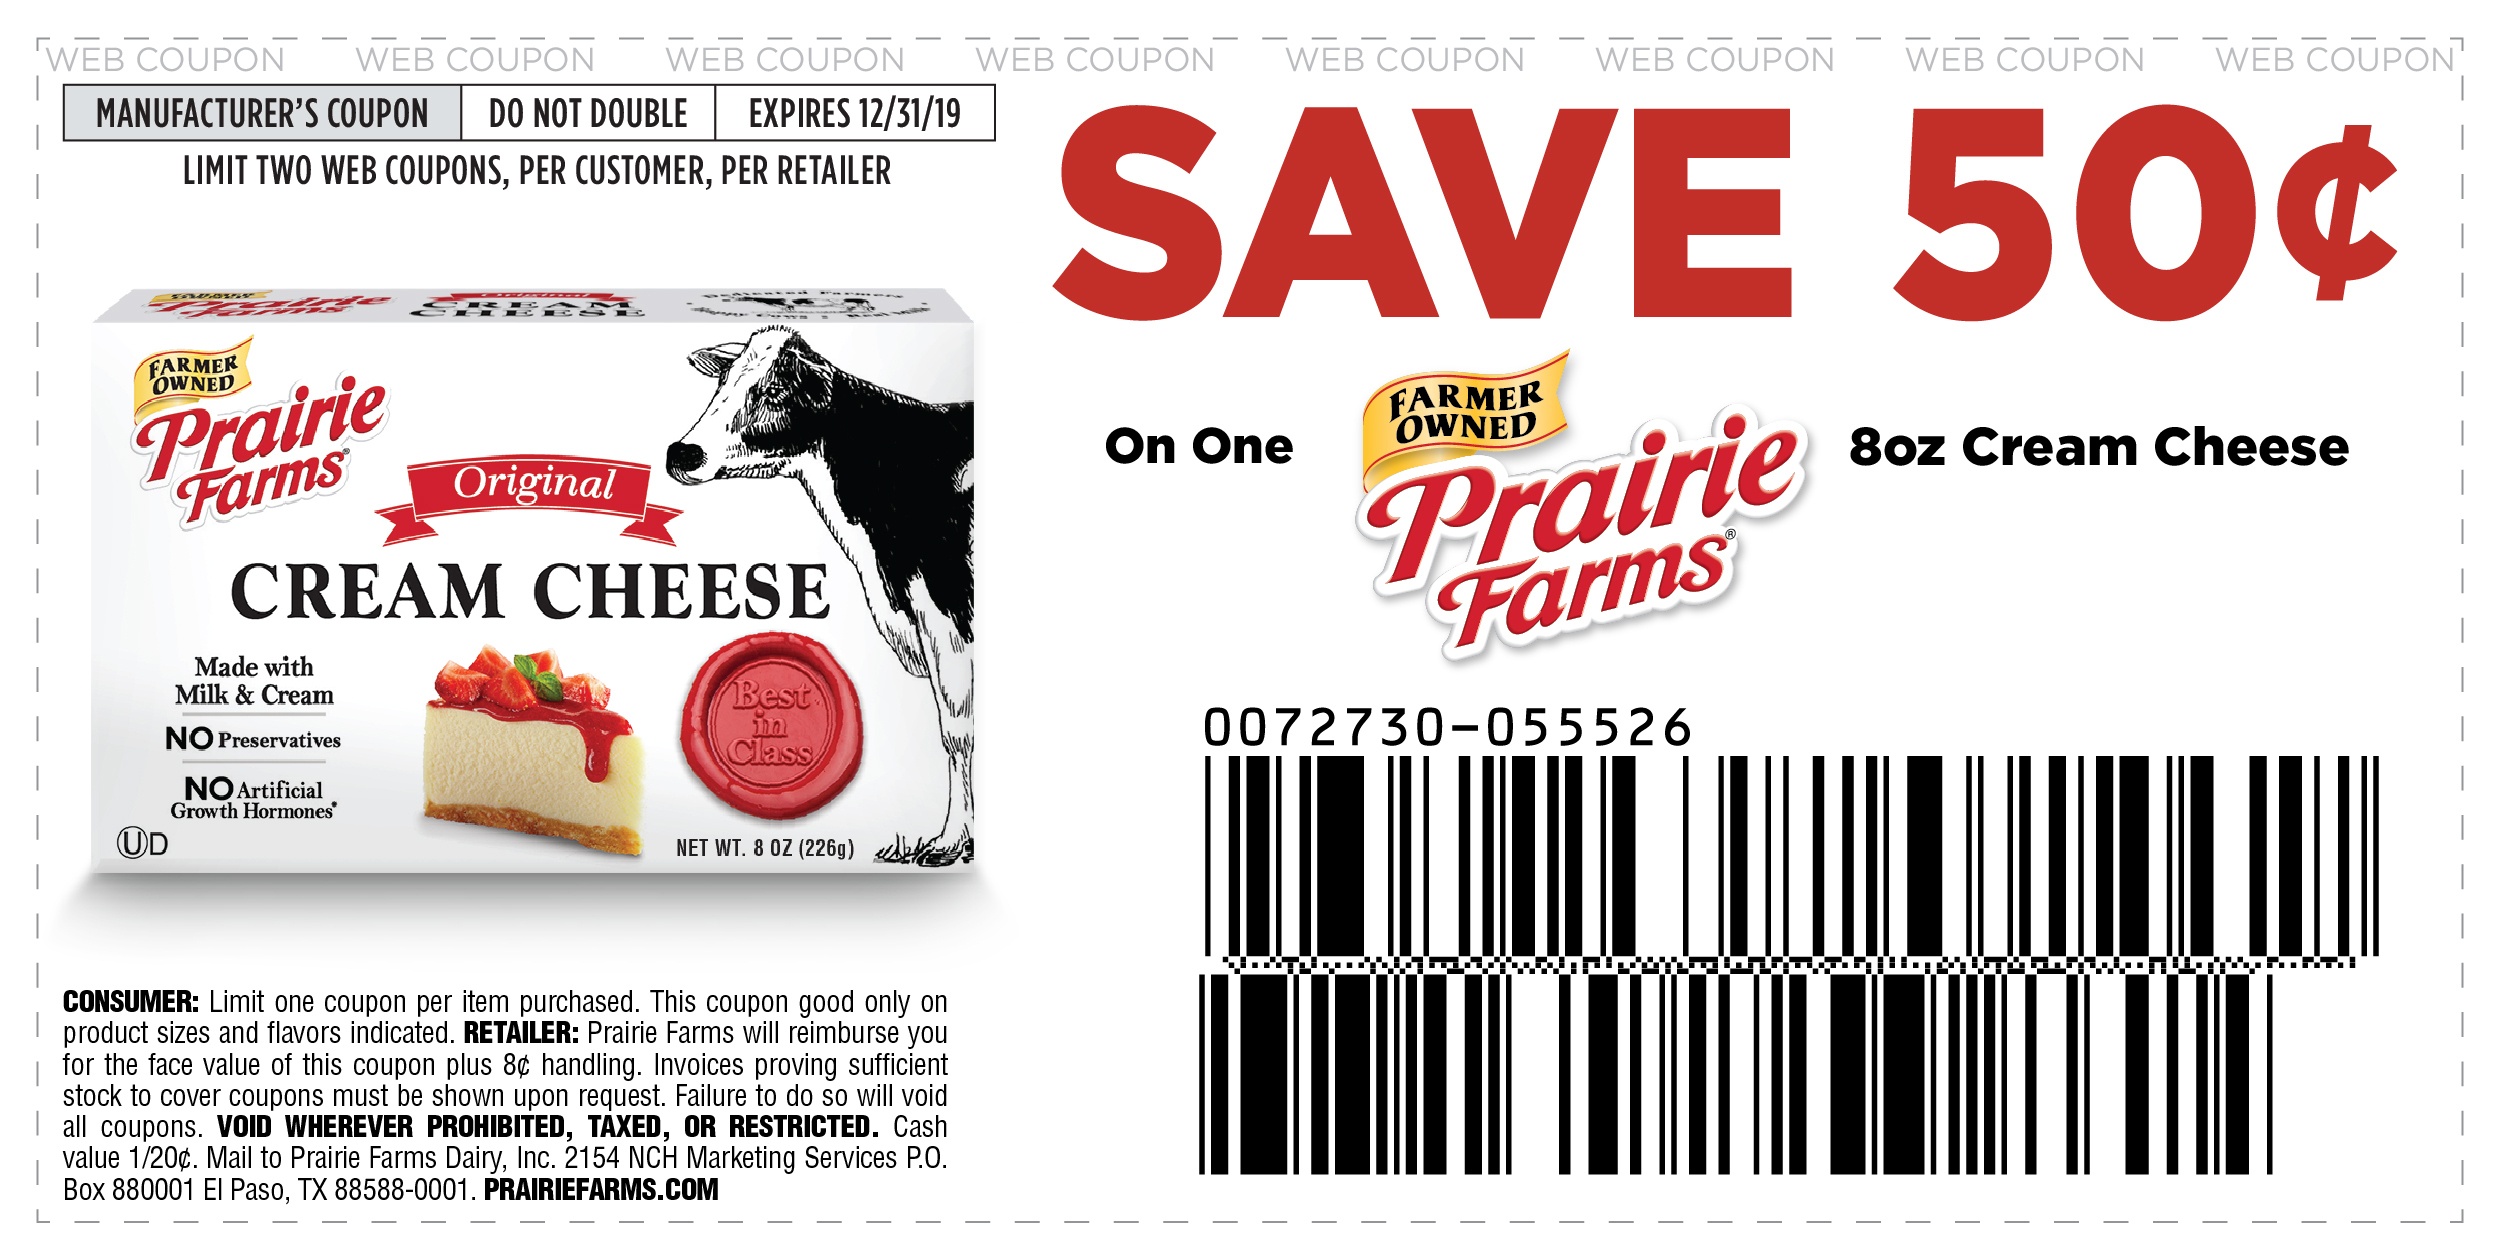 Prairie Farms Coupons, Save Now, Ice Cream, Cottage Cheese, More - Free Milk Coupons Printable